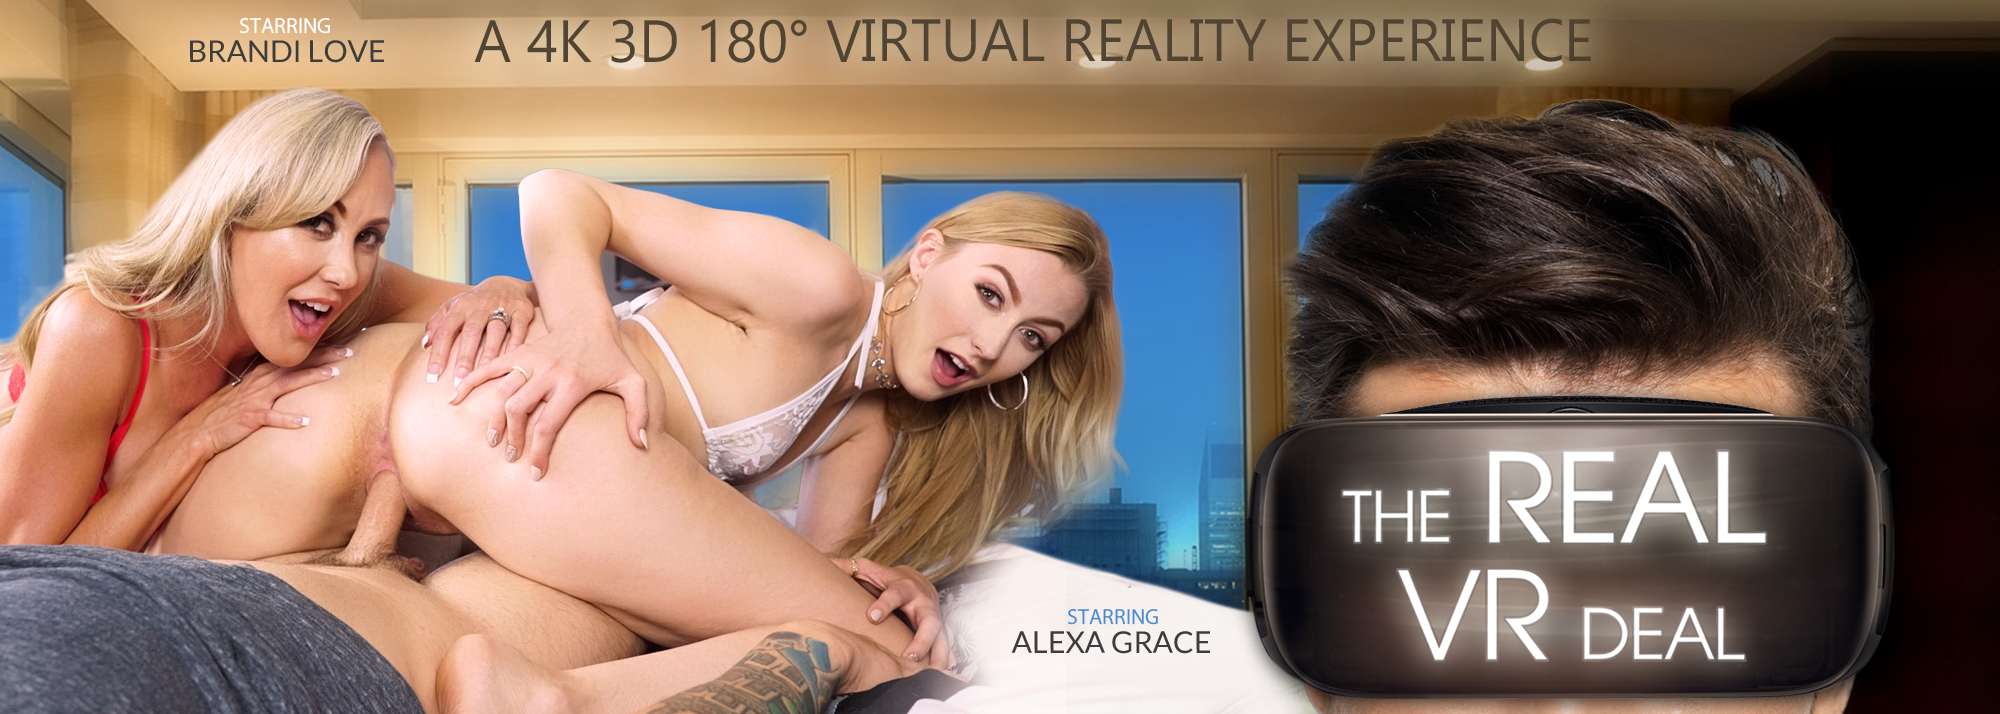 The Real VR Deal VR Porn Video: 8K, 4K, Full HD and 180/360 POV | VR Bangers